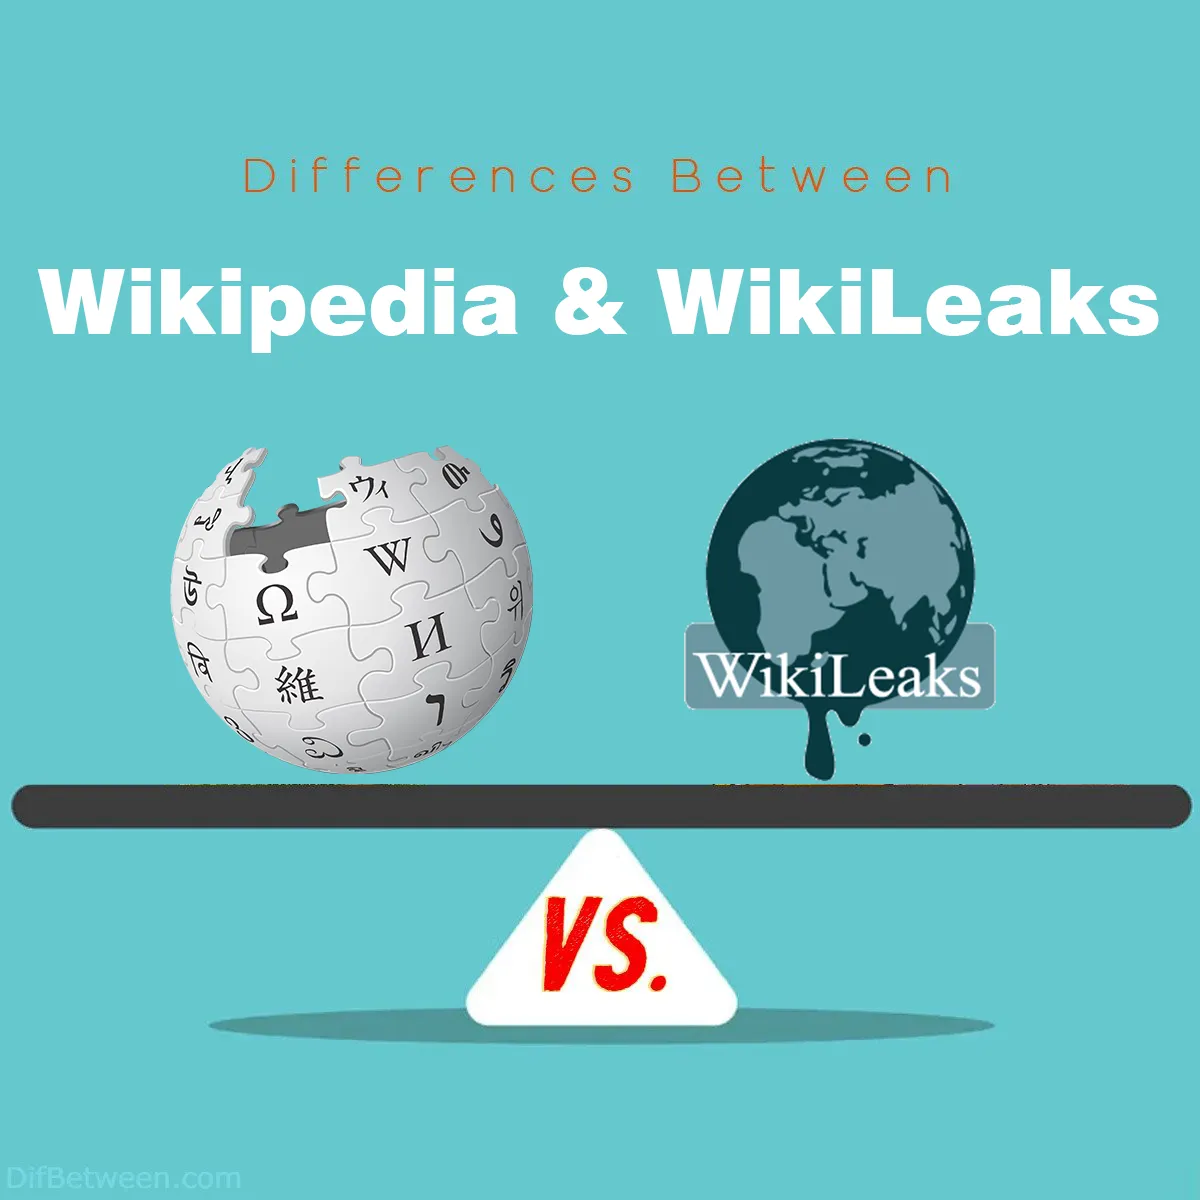 Differences Between Wikipedia and WikiLeaks